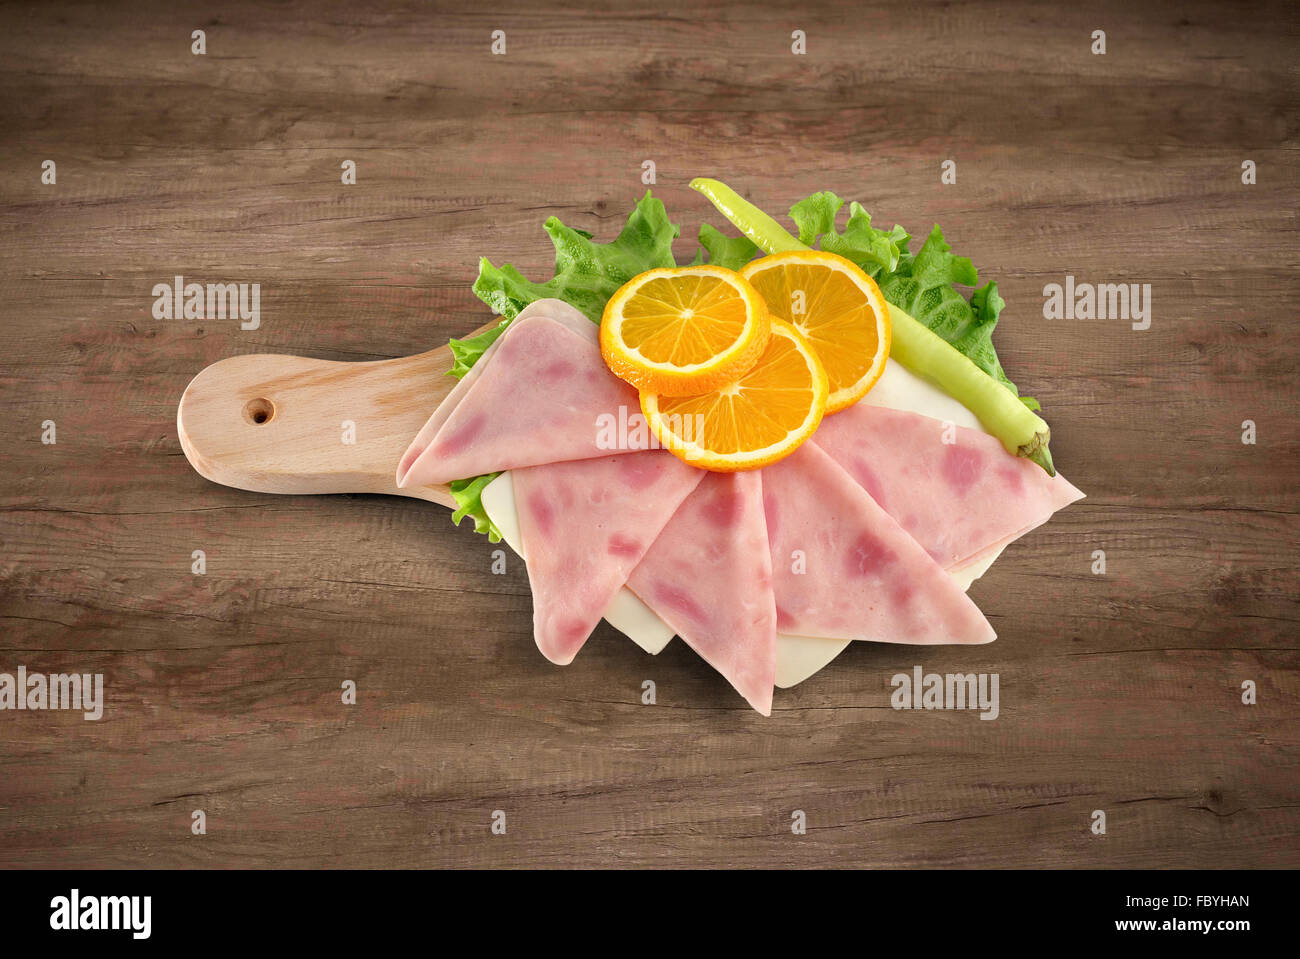 Pizza ham sliced on wooden board with clipping path Stock Photo